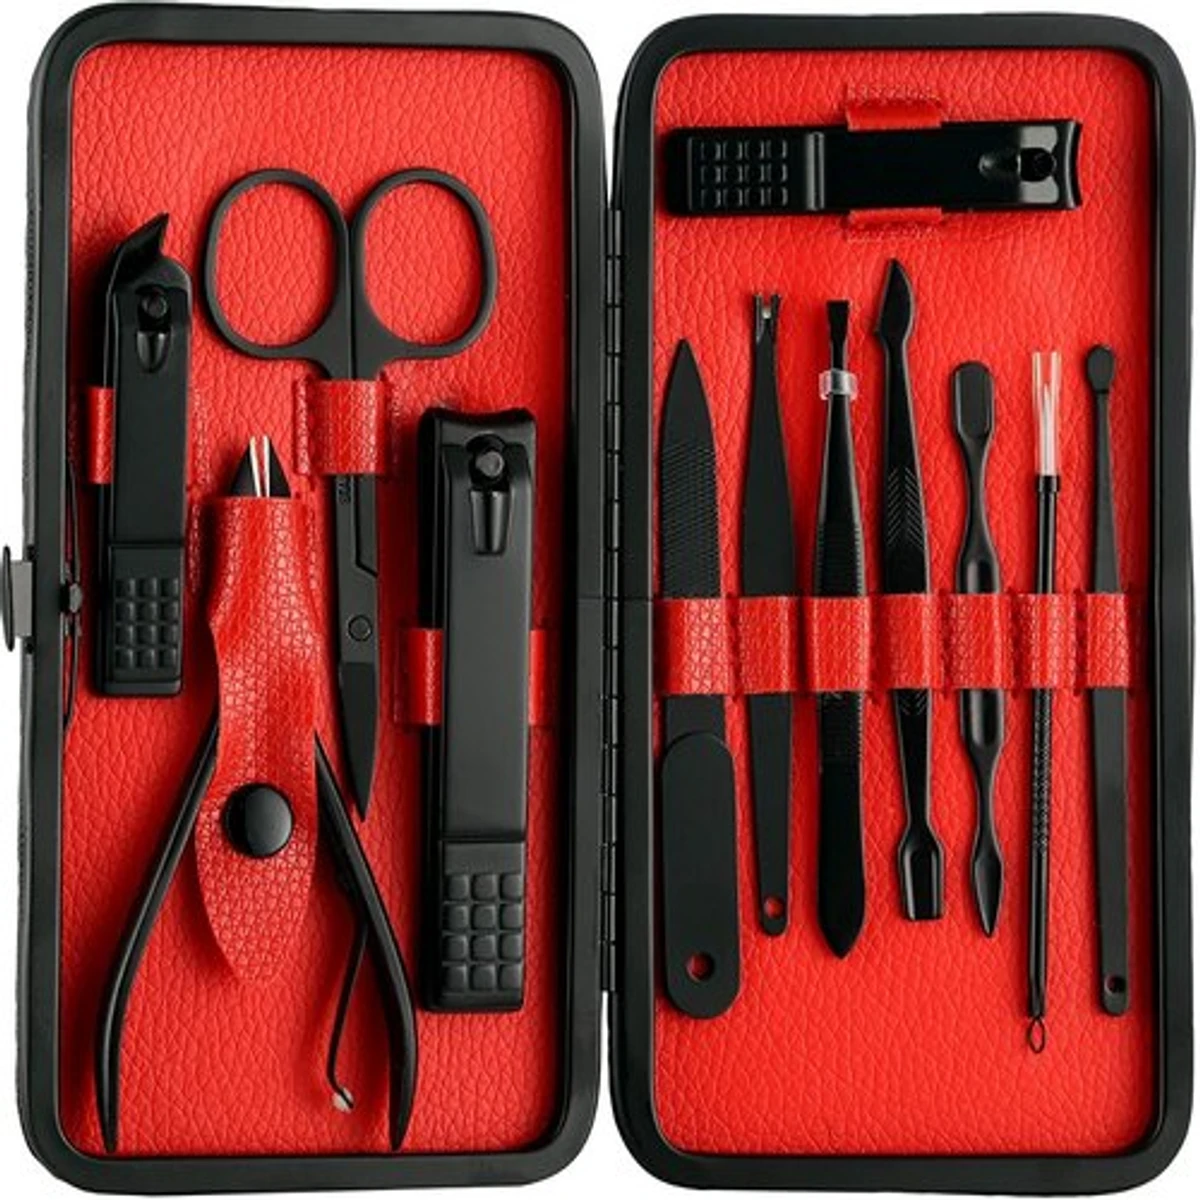 Manicure Pedicure Set Nail Clippers - Mifine 16 In 1 Stainless Steel Professional Pedicure Kit Nail Scissors Grooming Kit with Black Leather Travel Case First Generation